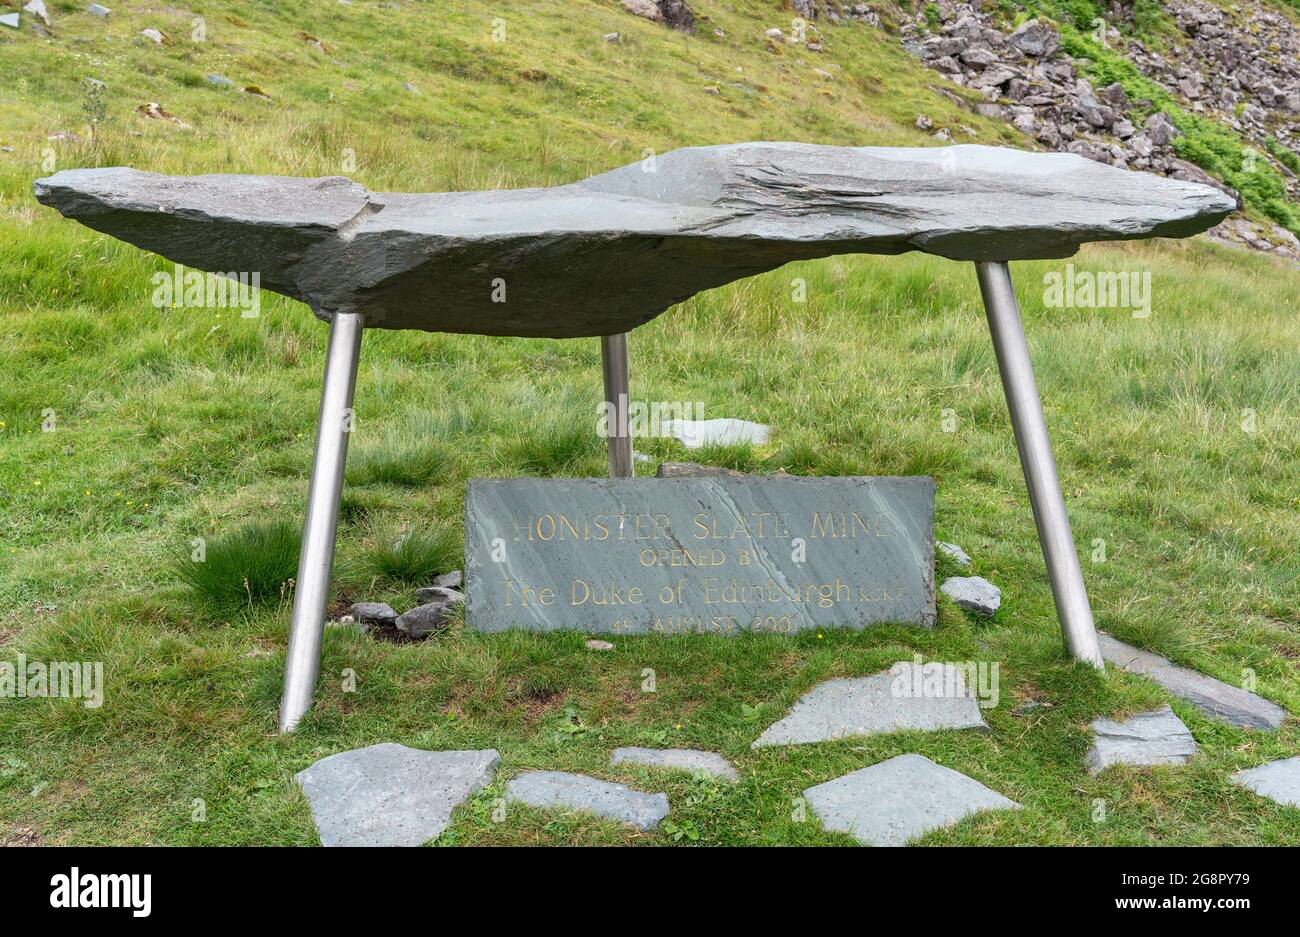 Green slate tablet with shelter commemorating opening by the Duke of Edinburgh of the Honister Slate Mine in the Lake District Cumbria UK Stock Photo